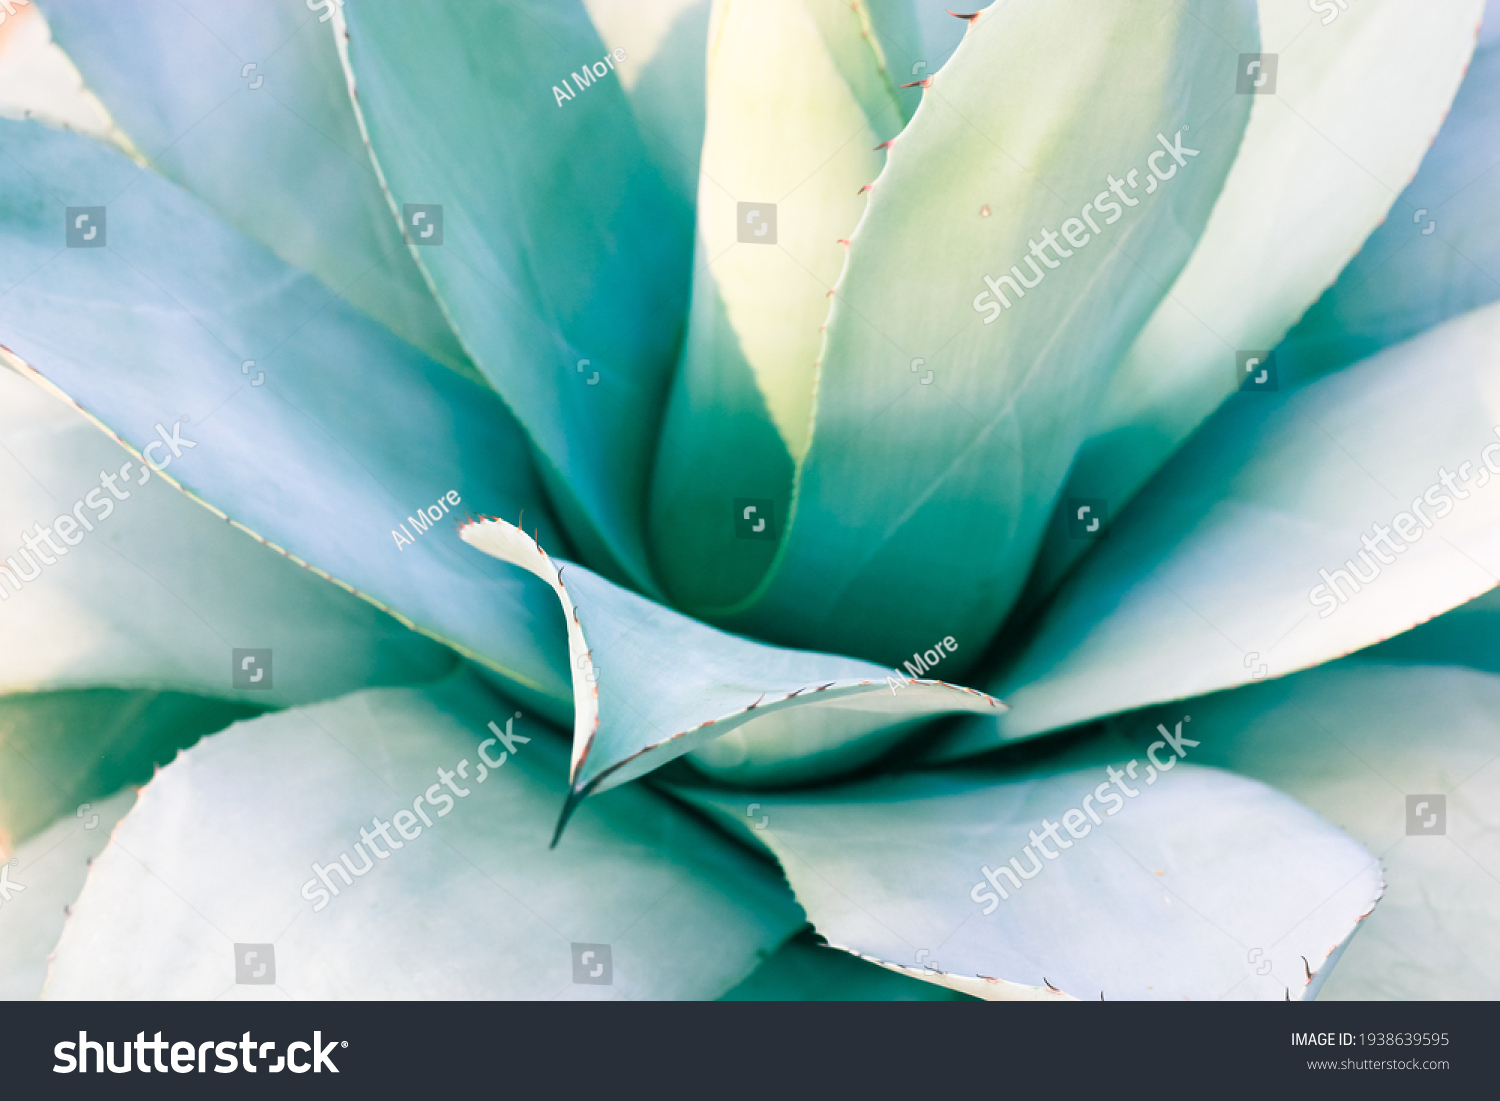 A beautiful giant blue-green agave leaves with thorns, Asparagaceae backgrounds and textures. Exotic plants of Mexico used in pharmacology, making cosmetic products. Cacti and succulents close-up. #1938639595